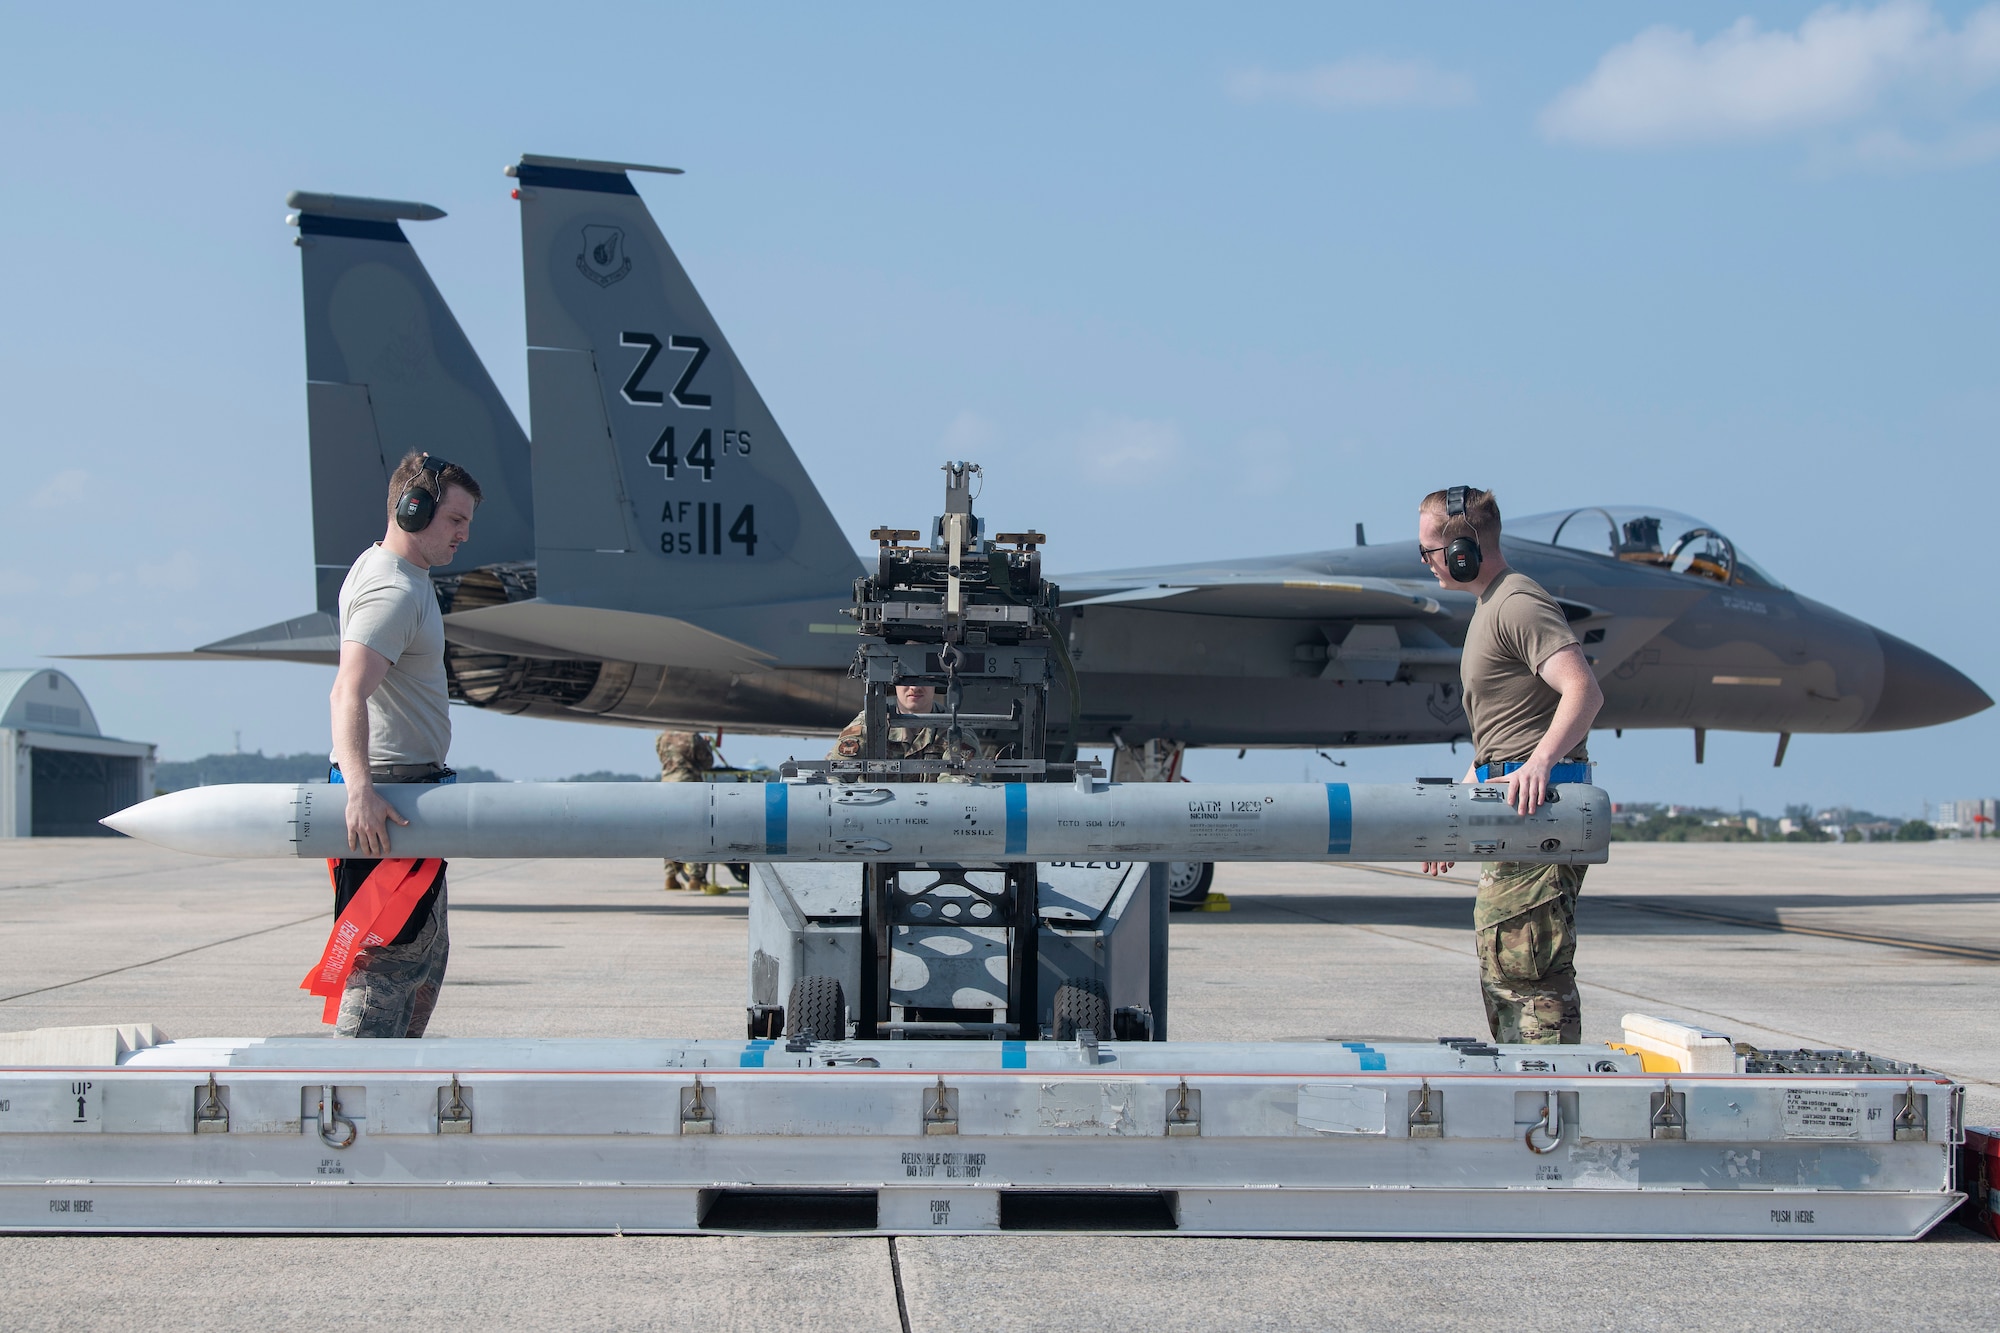 U.S. Air Force Staff Sgt. Cameron Schoppert, 44th Aircraft Maintenance Unit weapons load crew chief, left, Airman 1st Class Brody Graham, 44th AMU weapons load crew member, center, and Senior Airman Charles Sapp, 44th AMU weapons load crew member, right, prepare to rearm an F-15C Eagle during an Agile Combat Employment exercise Feb. 21, 2020, at Marine Corps Air Station Futenma, Japan. Exercises that test our multi-capable Airmen and joint partners to provide munition loading and tactical refueling with minimal support are integral to employing precise ACE concept practices. (U.S. Air Force photo by Senior Airman Rhett Isbell)